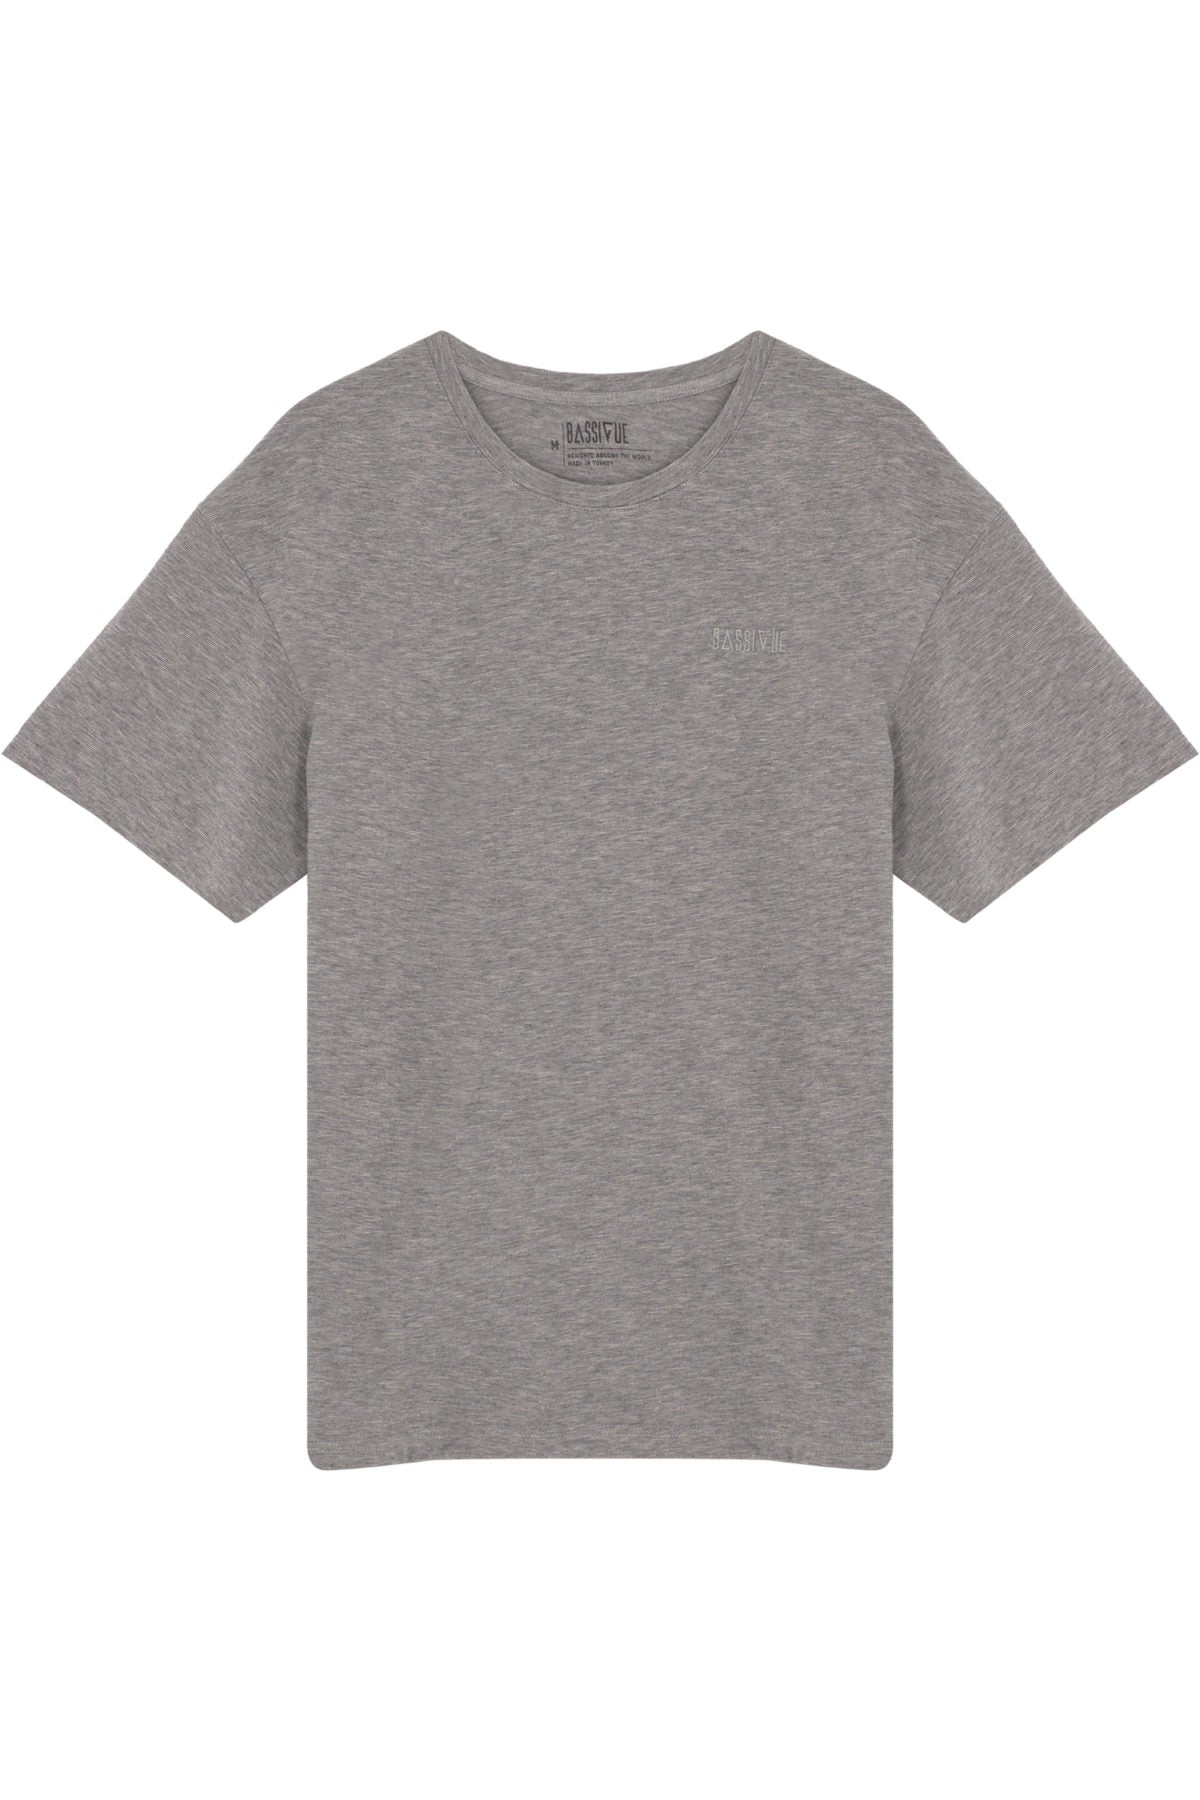 Load image into Gallery viewer, High Density T-Shirt - Grey
